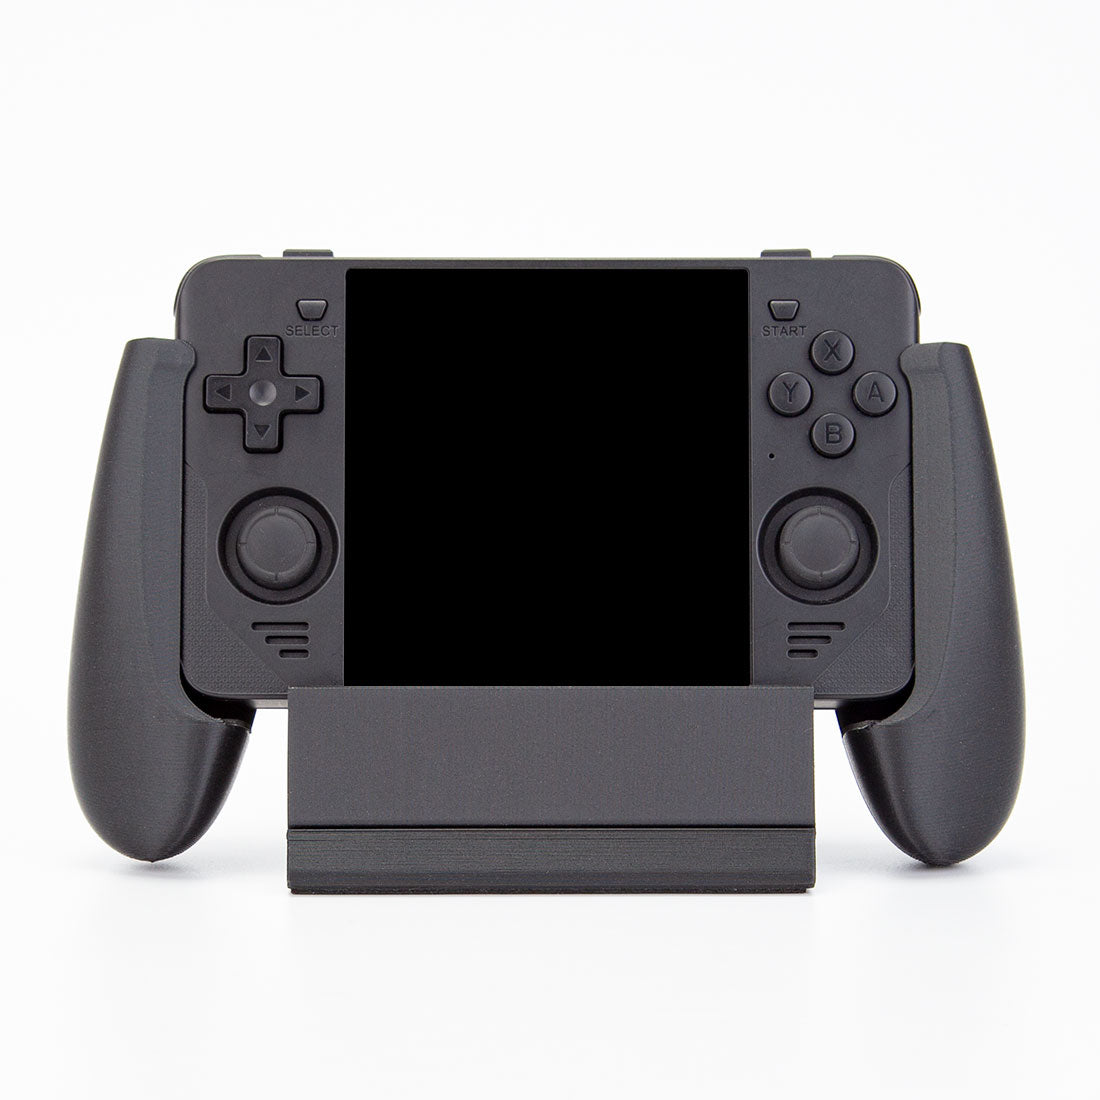 litnxt-3D-printed-handheld-for-powkiddy-rgb30-game-console-black-2